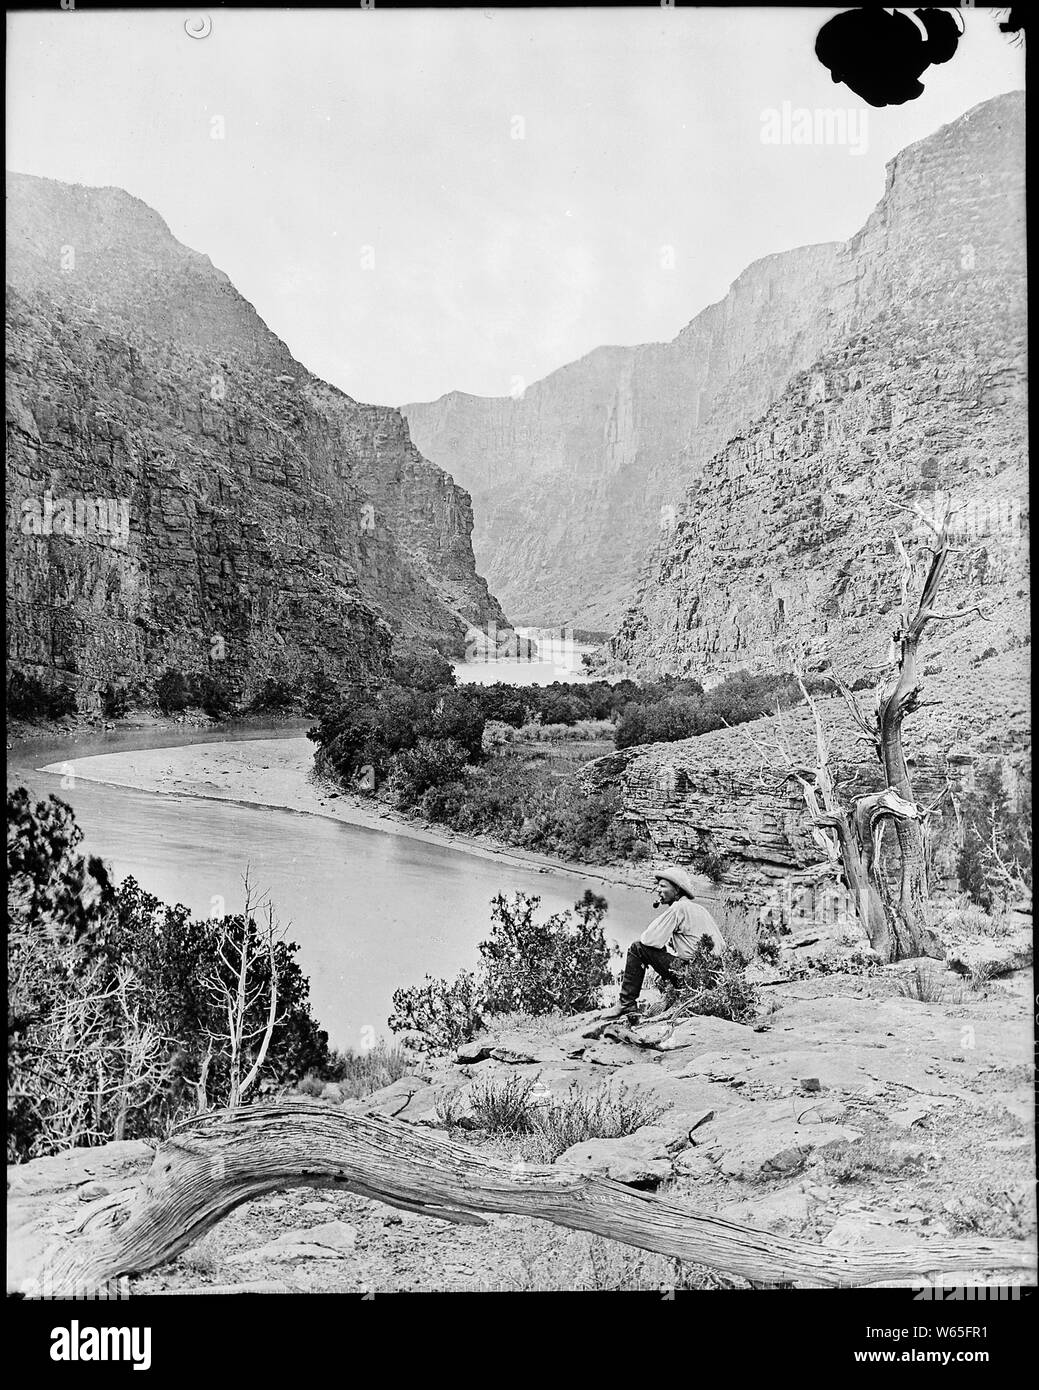 Gate of Lodore, Green River, N.W. Colorado *James C. Pilling sitting peacefully on the bank smoking his pipe and wearing knee high leather boots., 1871 - 1878 Stock Photo